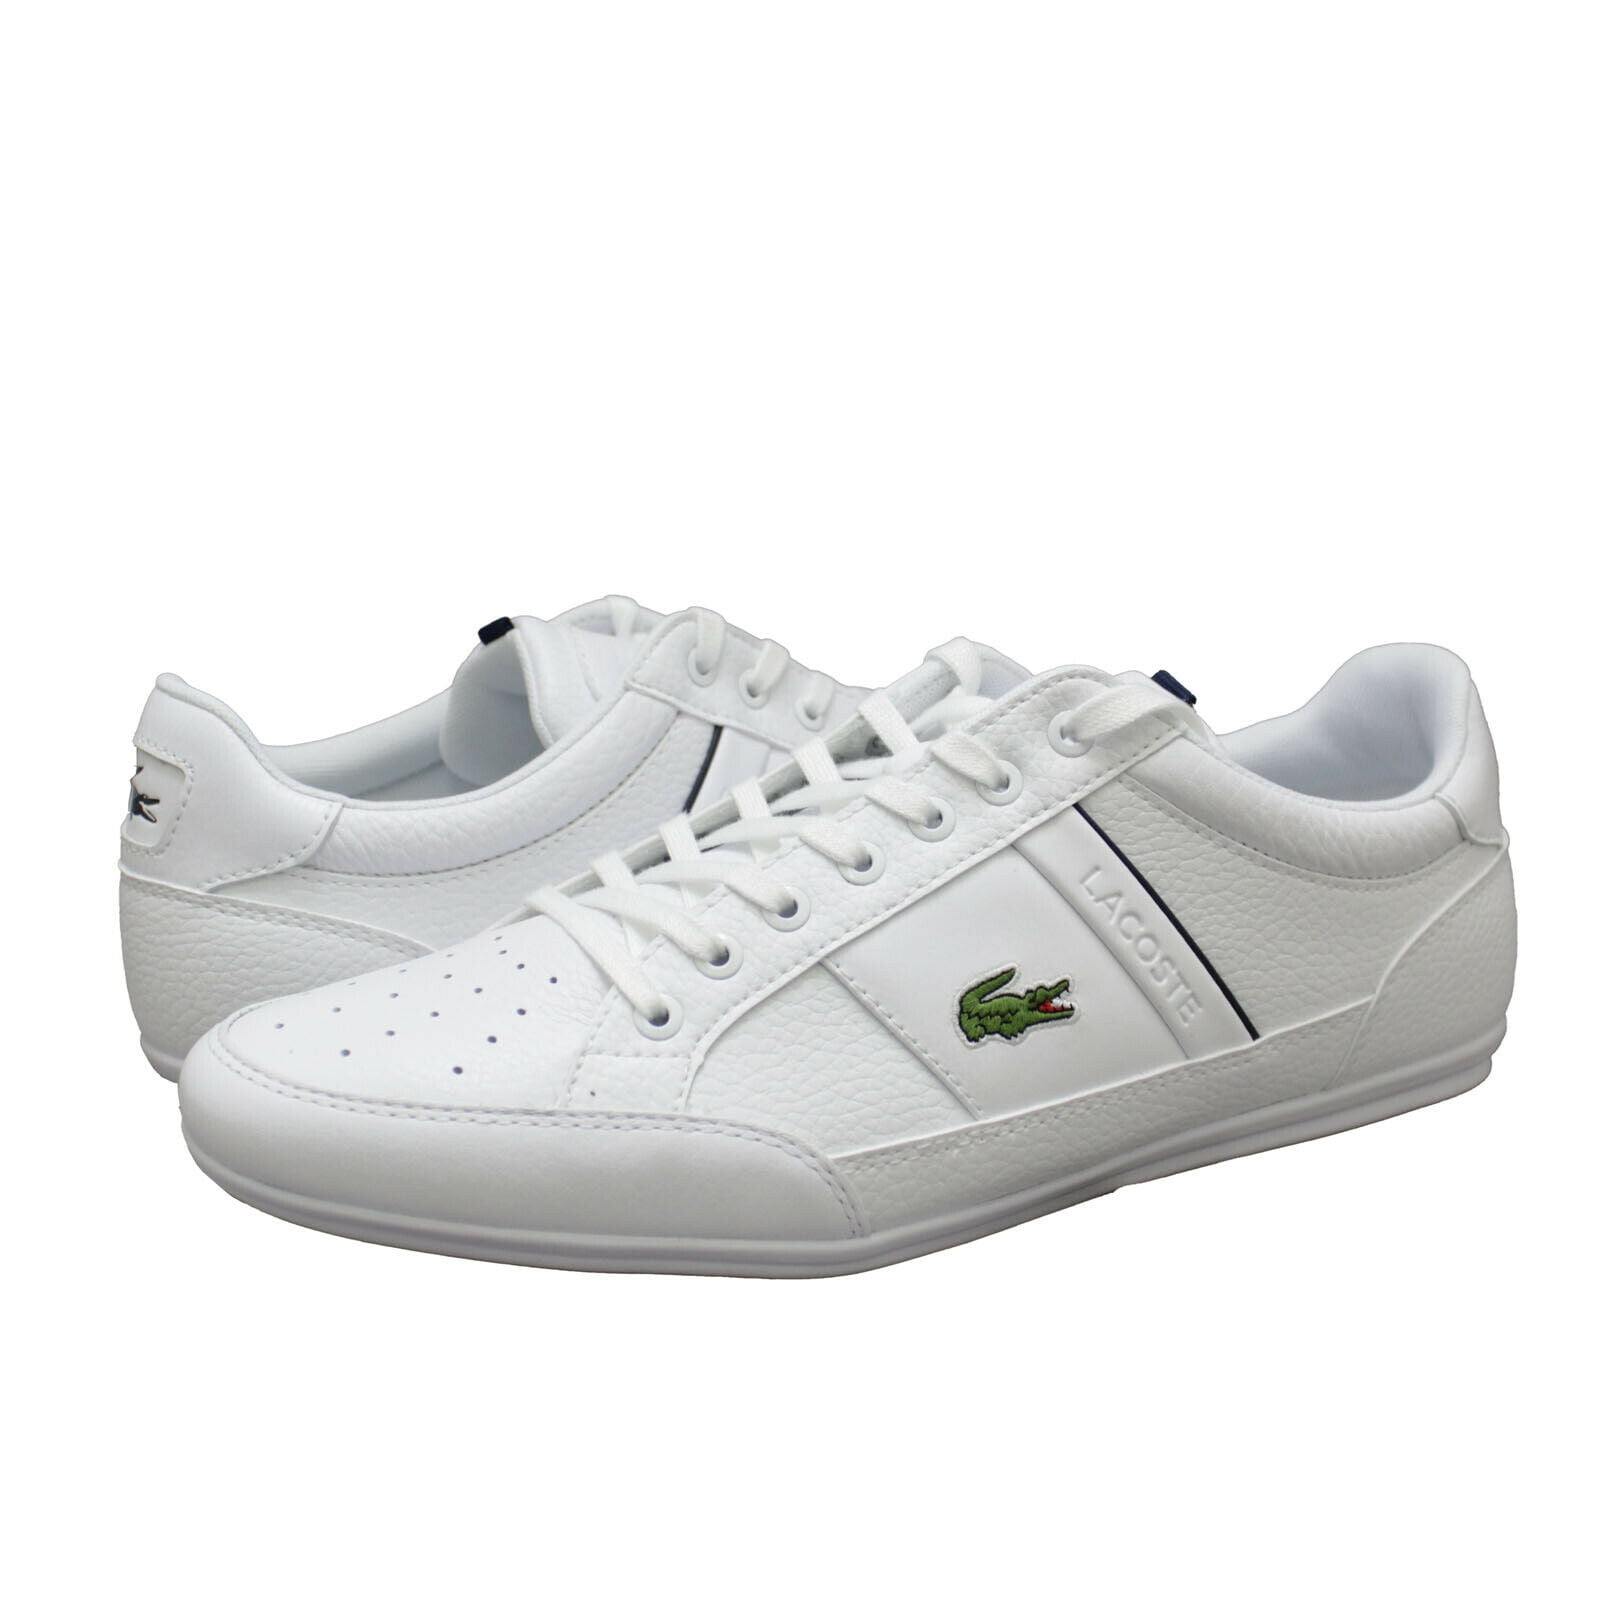 Men's Lacoste Chaymon Leather Low Cut Comfort Trainers in White